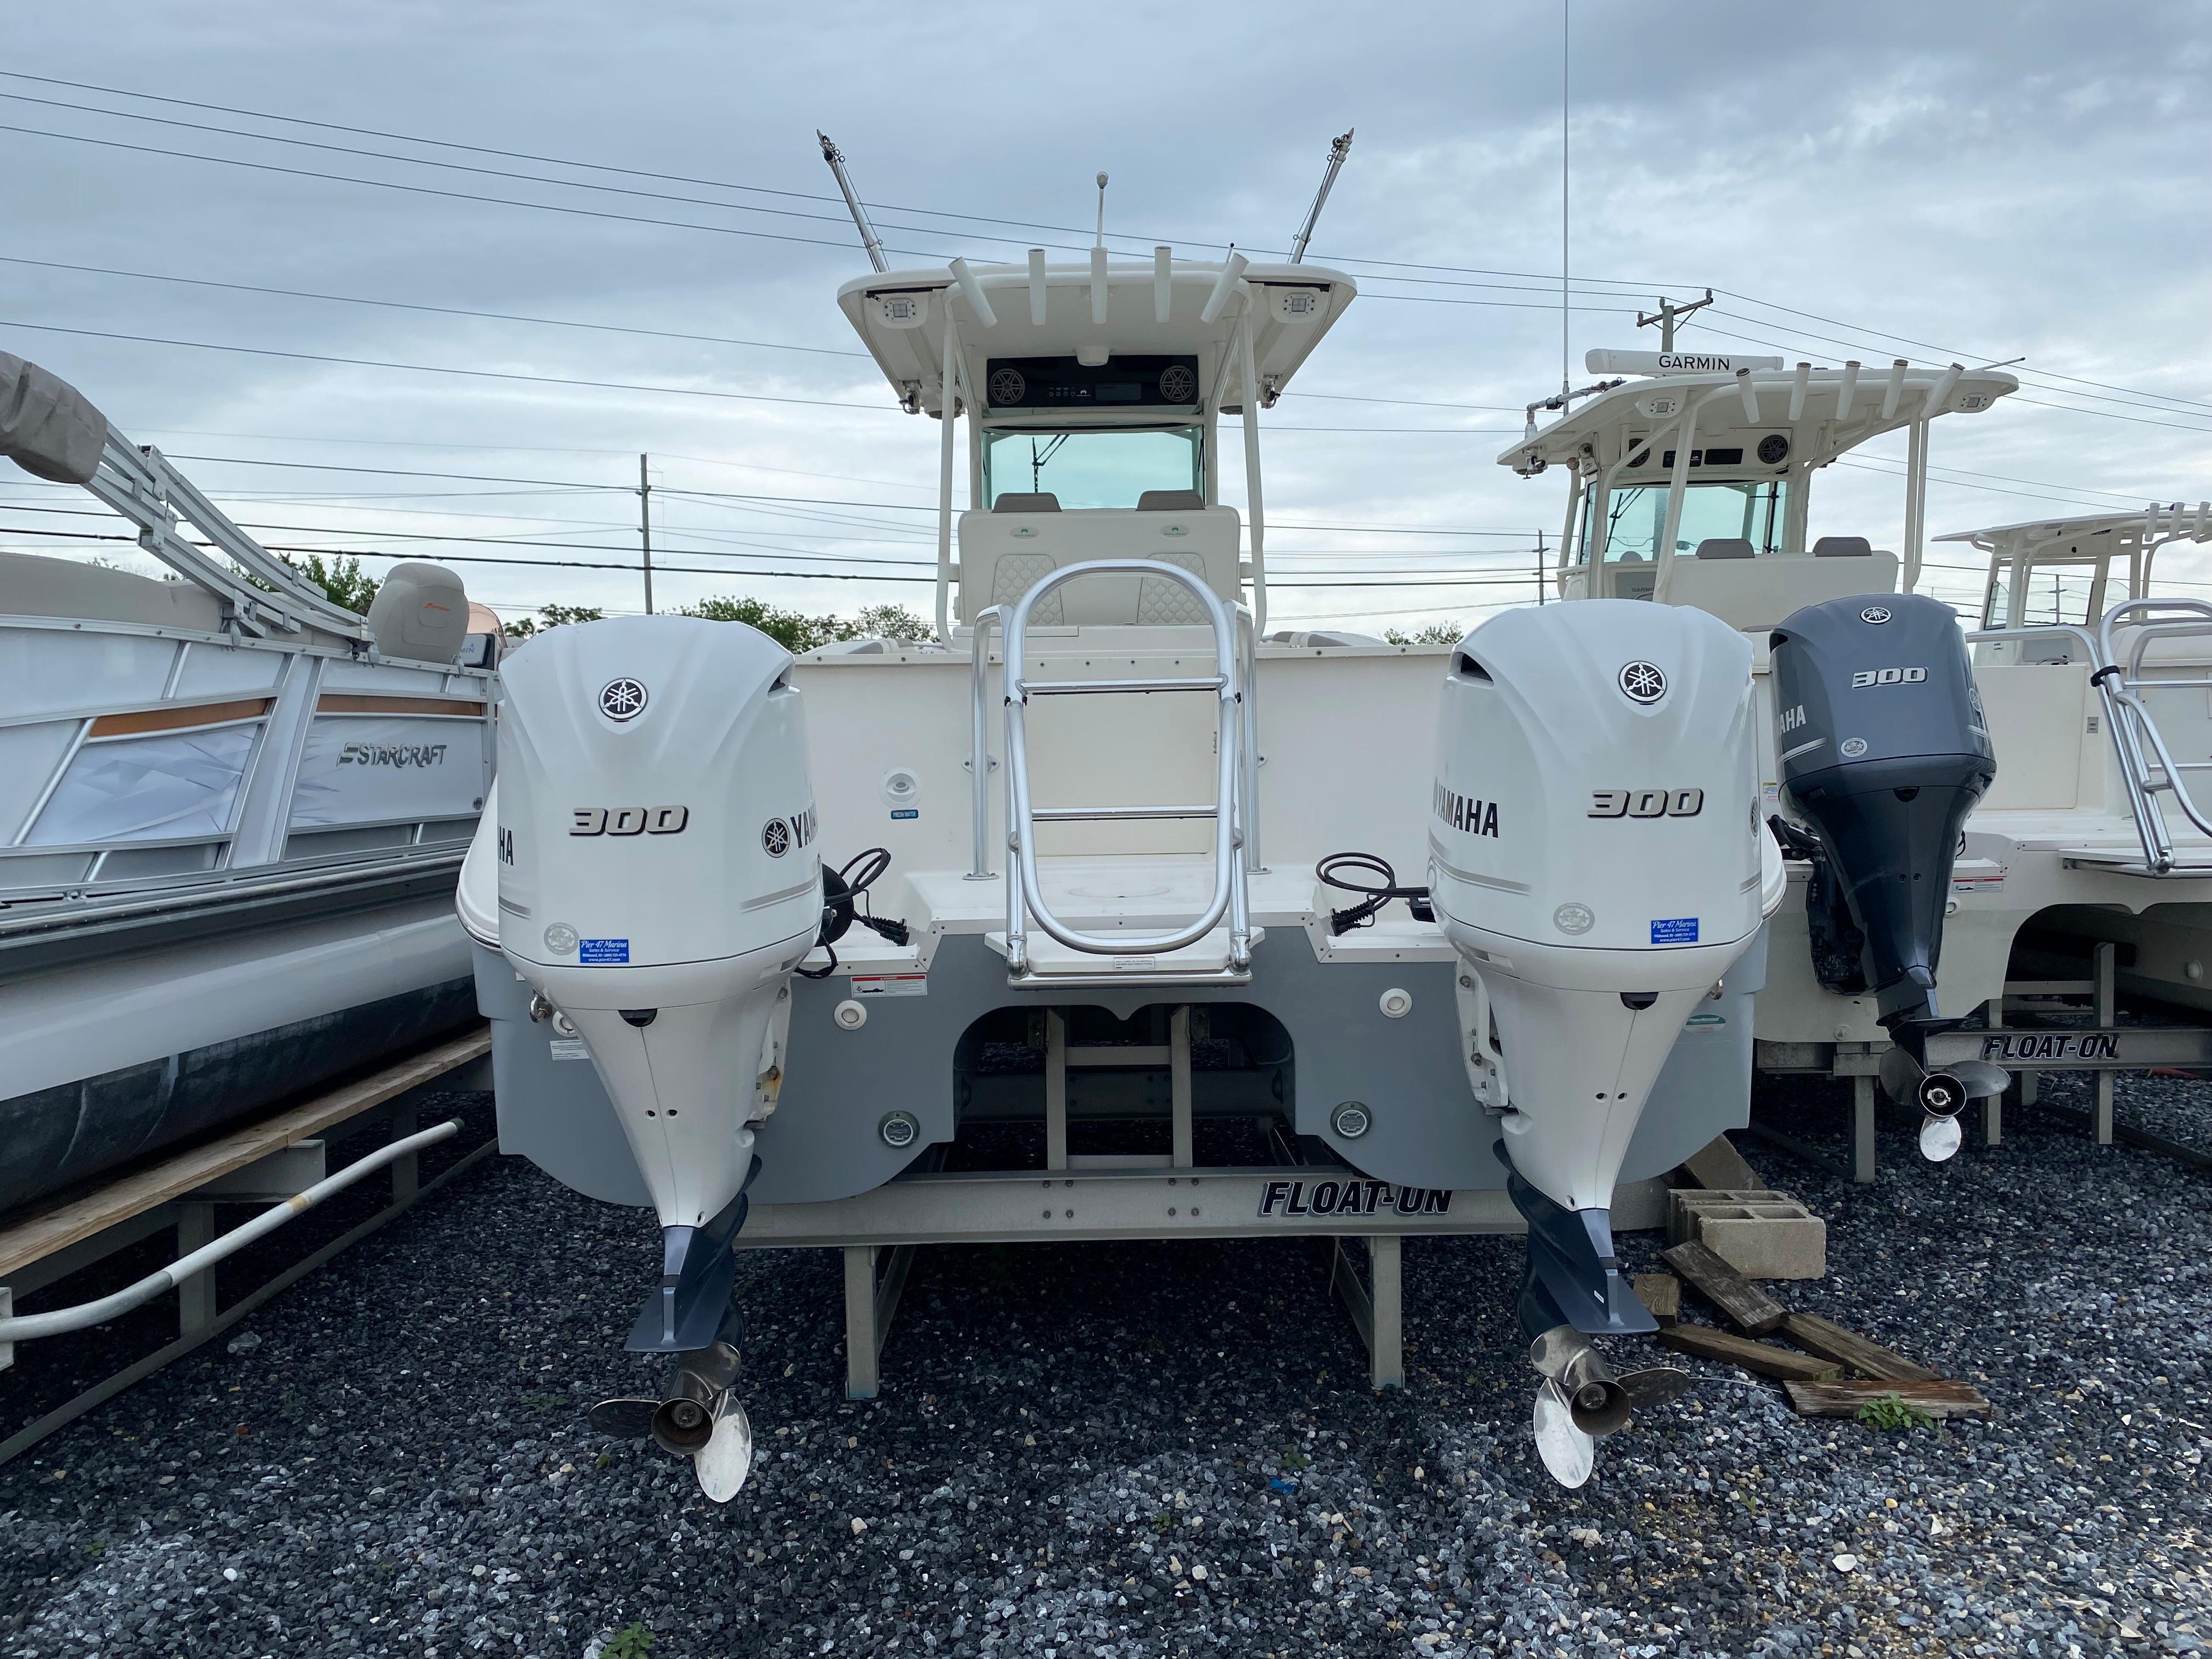 Explore World Cat 320 Cc Boats For Sale - Boat Trader